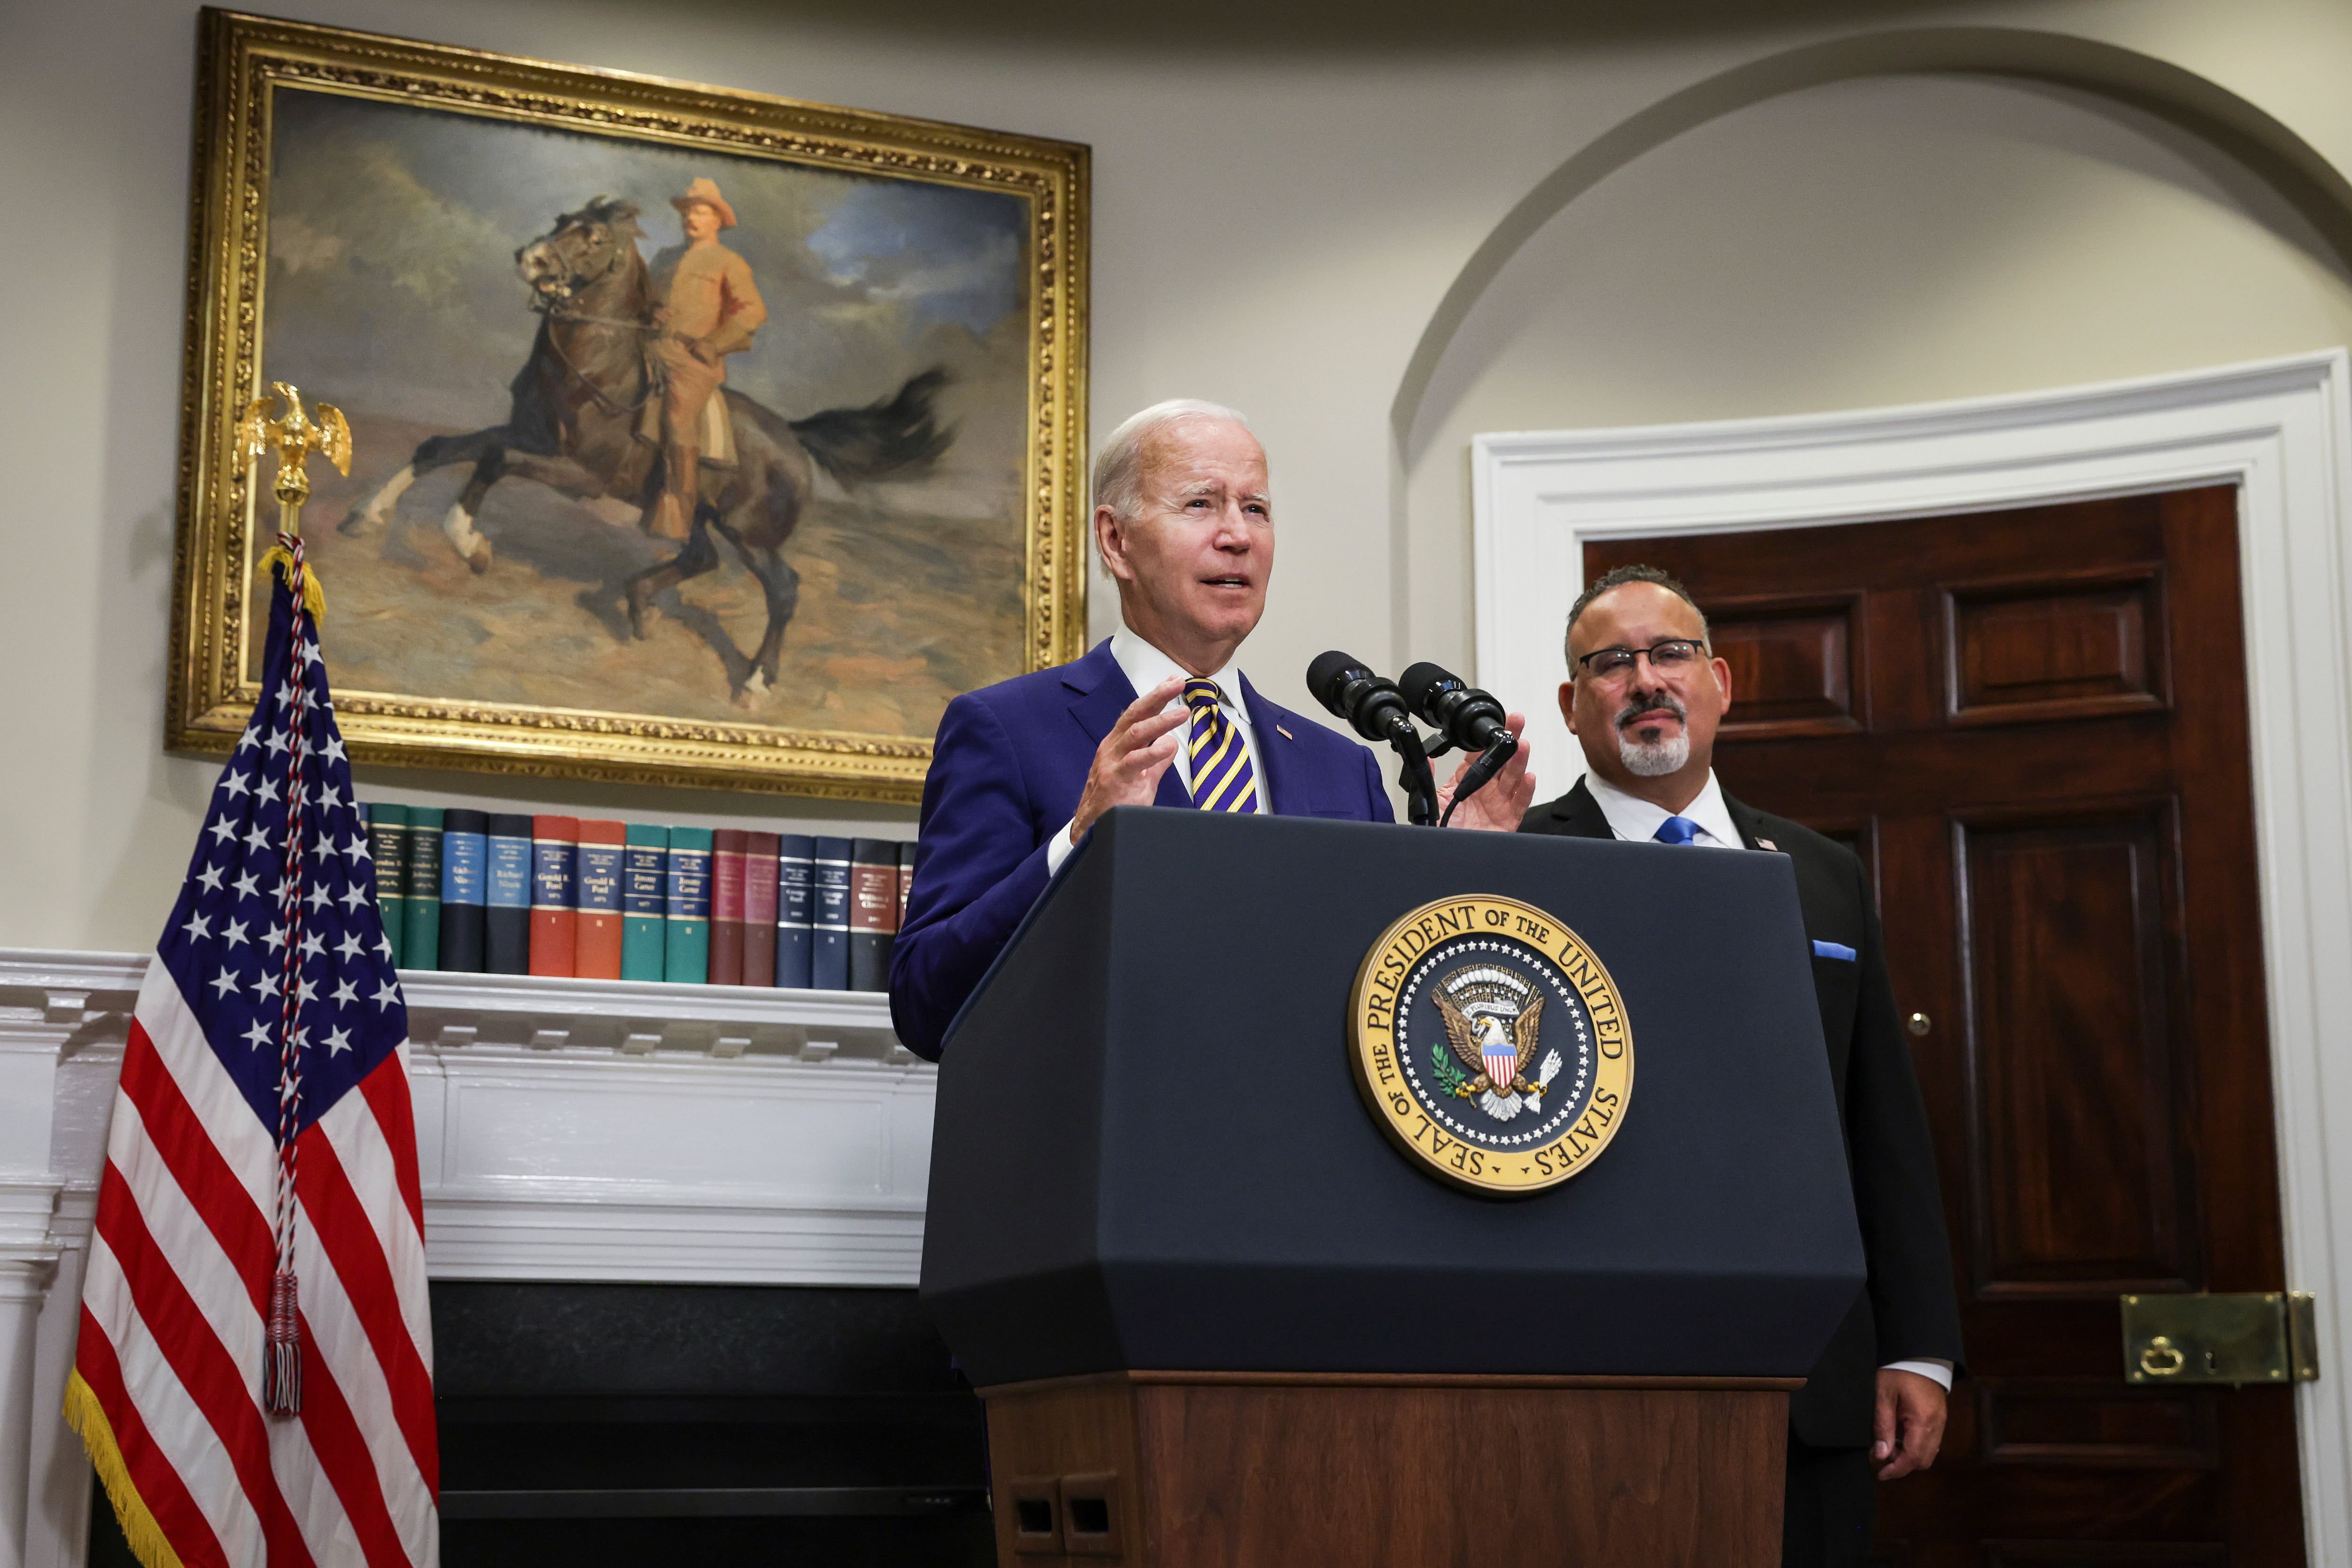 President Joe Biden speaks from a podium while Education Secretary Miguel Cardona stands to the right.